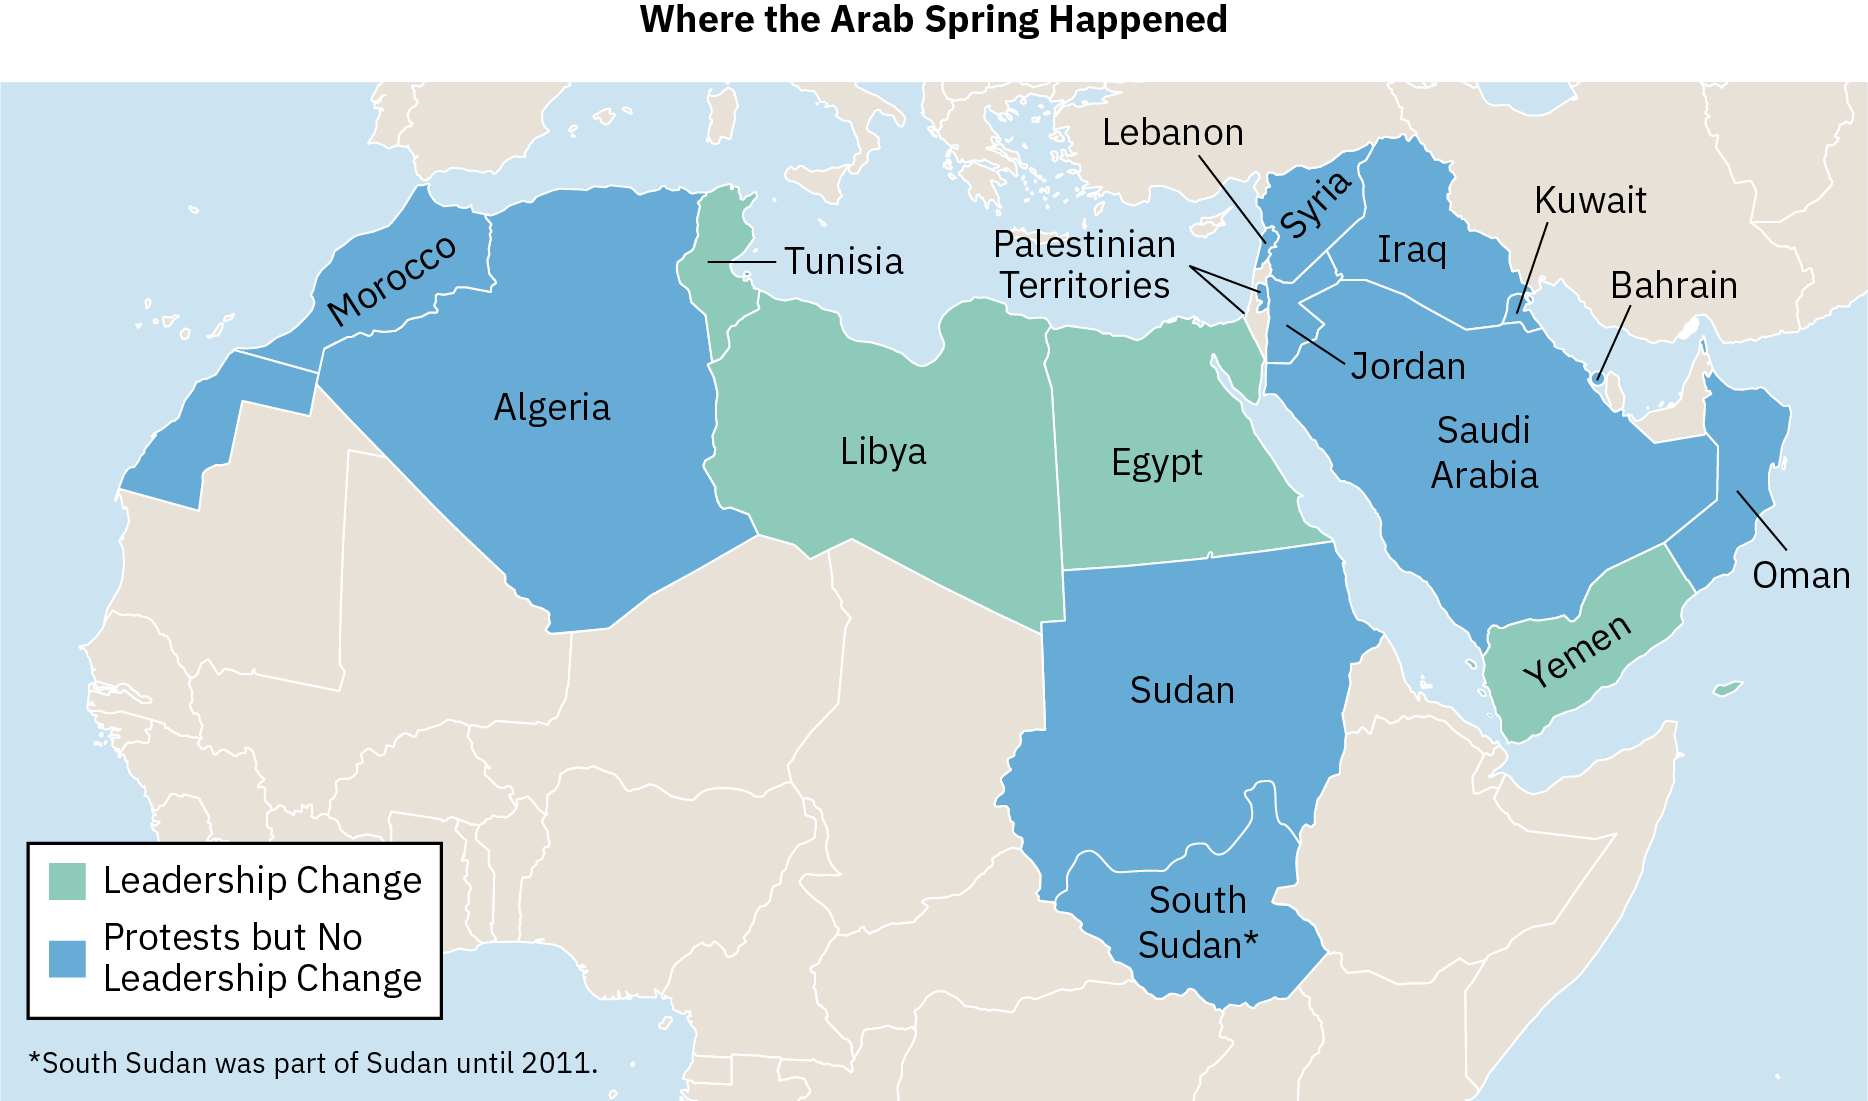 A map of the Middle East shows the area where the Arab Spring occurred. Tunisia, Libya, Egypt, and Yemen recorded a change in leadership, while other countries in the region recorded protests only.